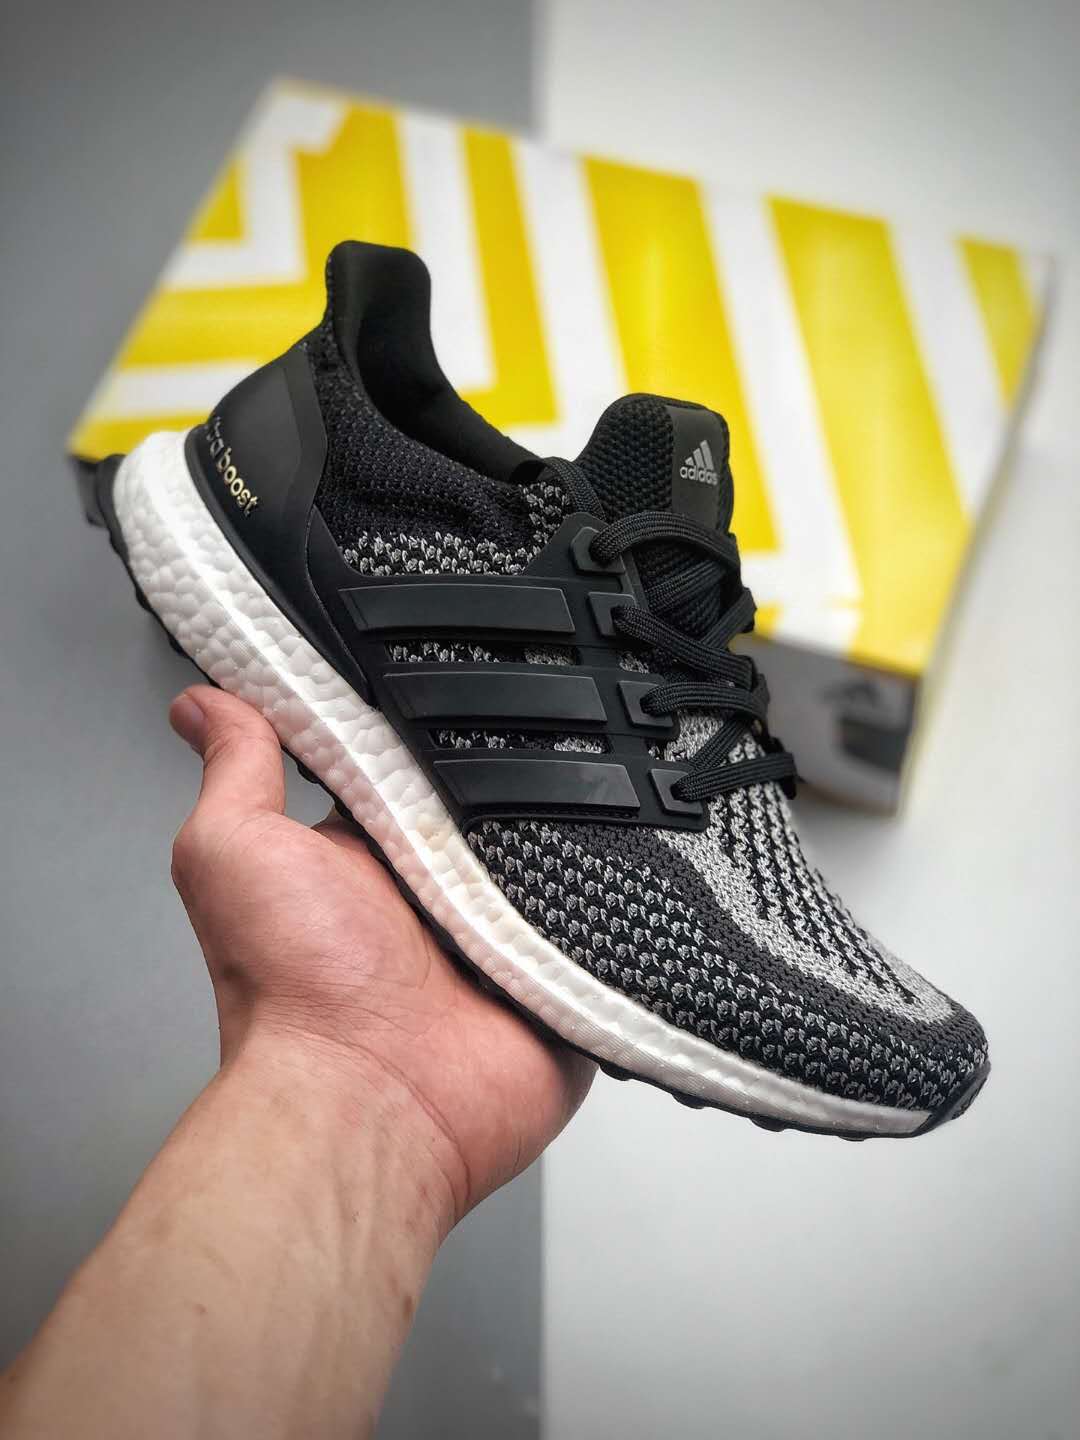 Adidas Ultra Boost 2.0 Black Reflective BY1795 - Limited Edition Stylish Sneakers